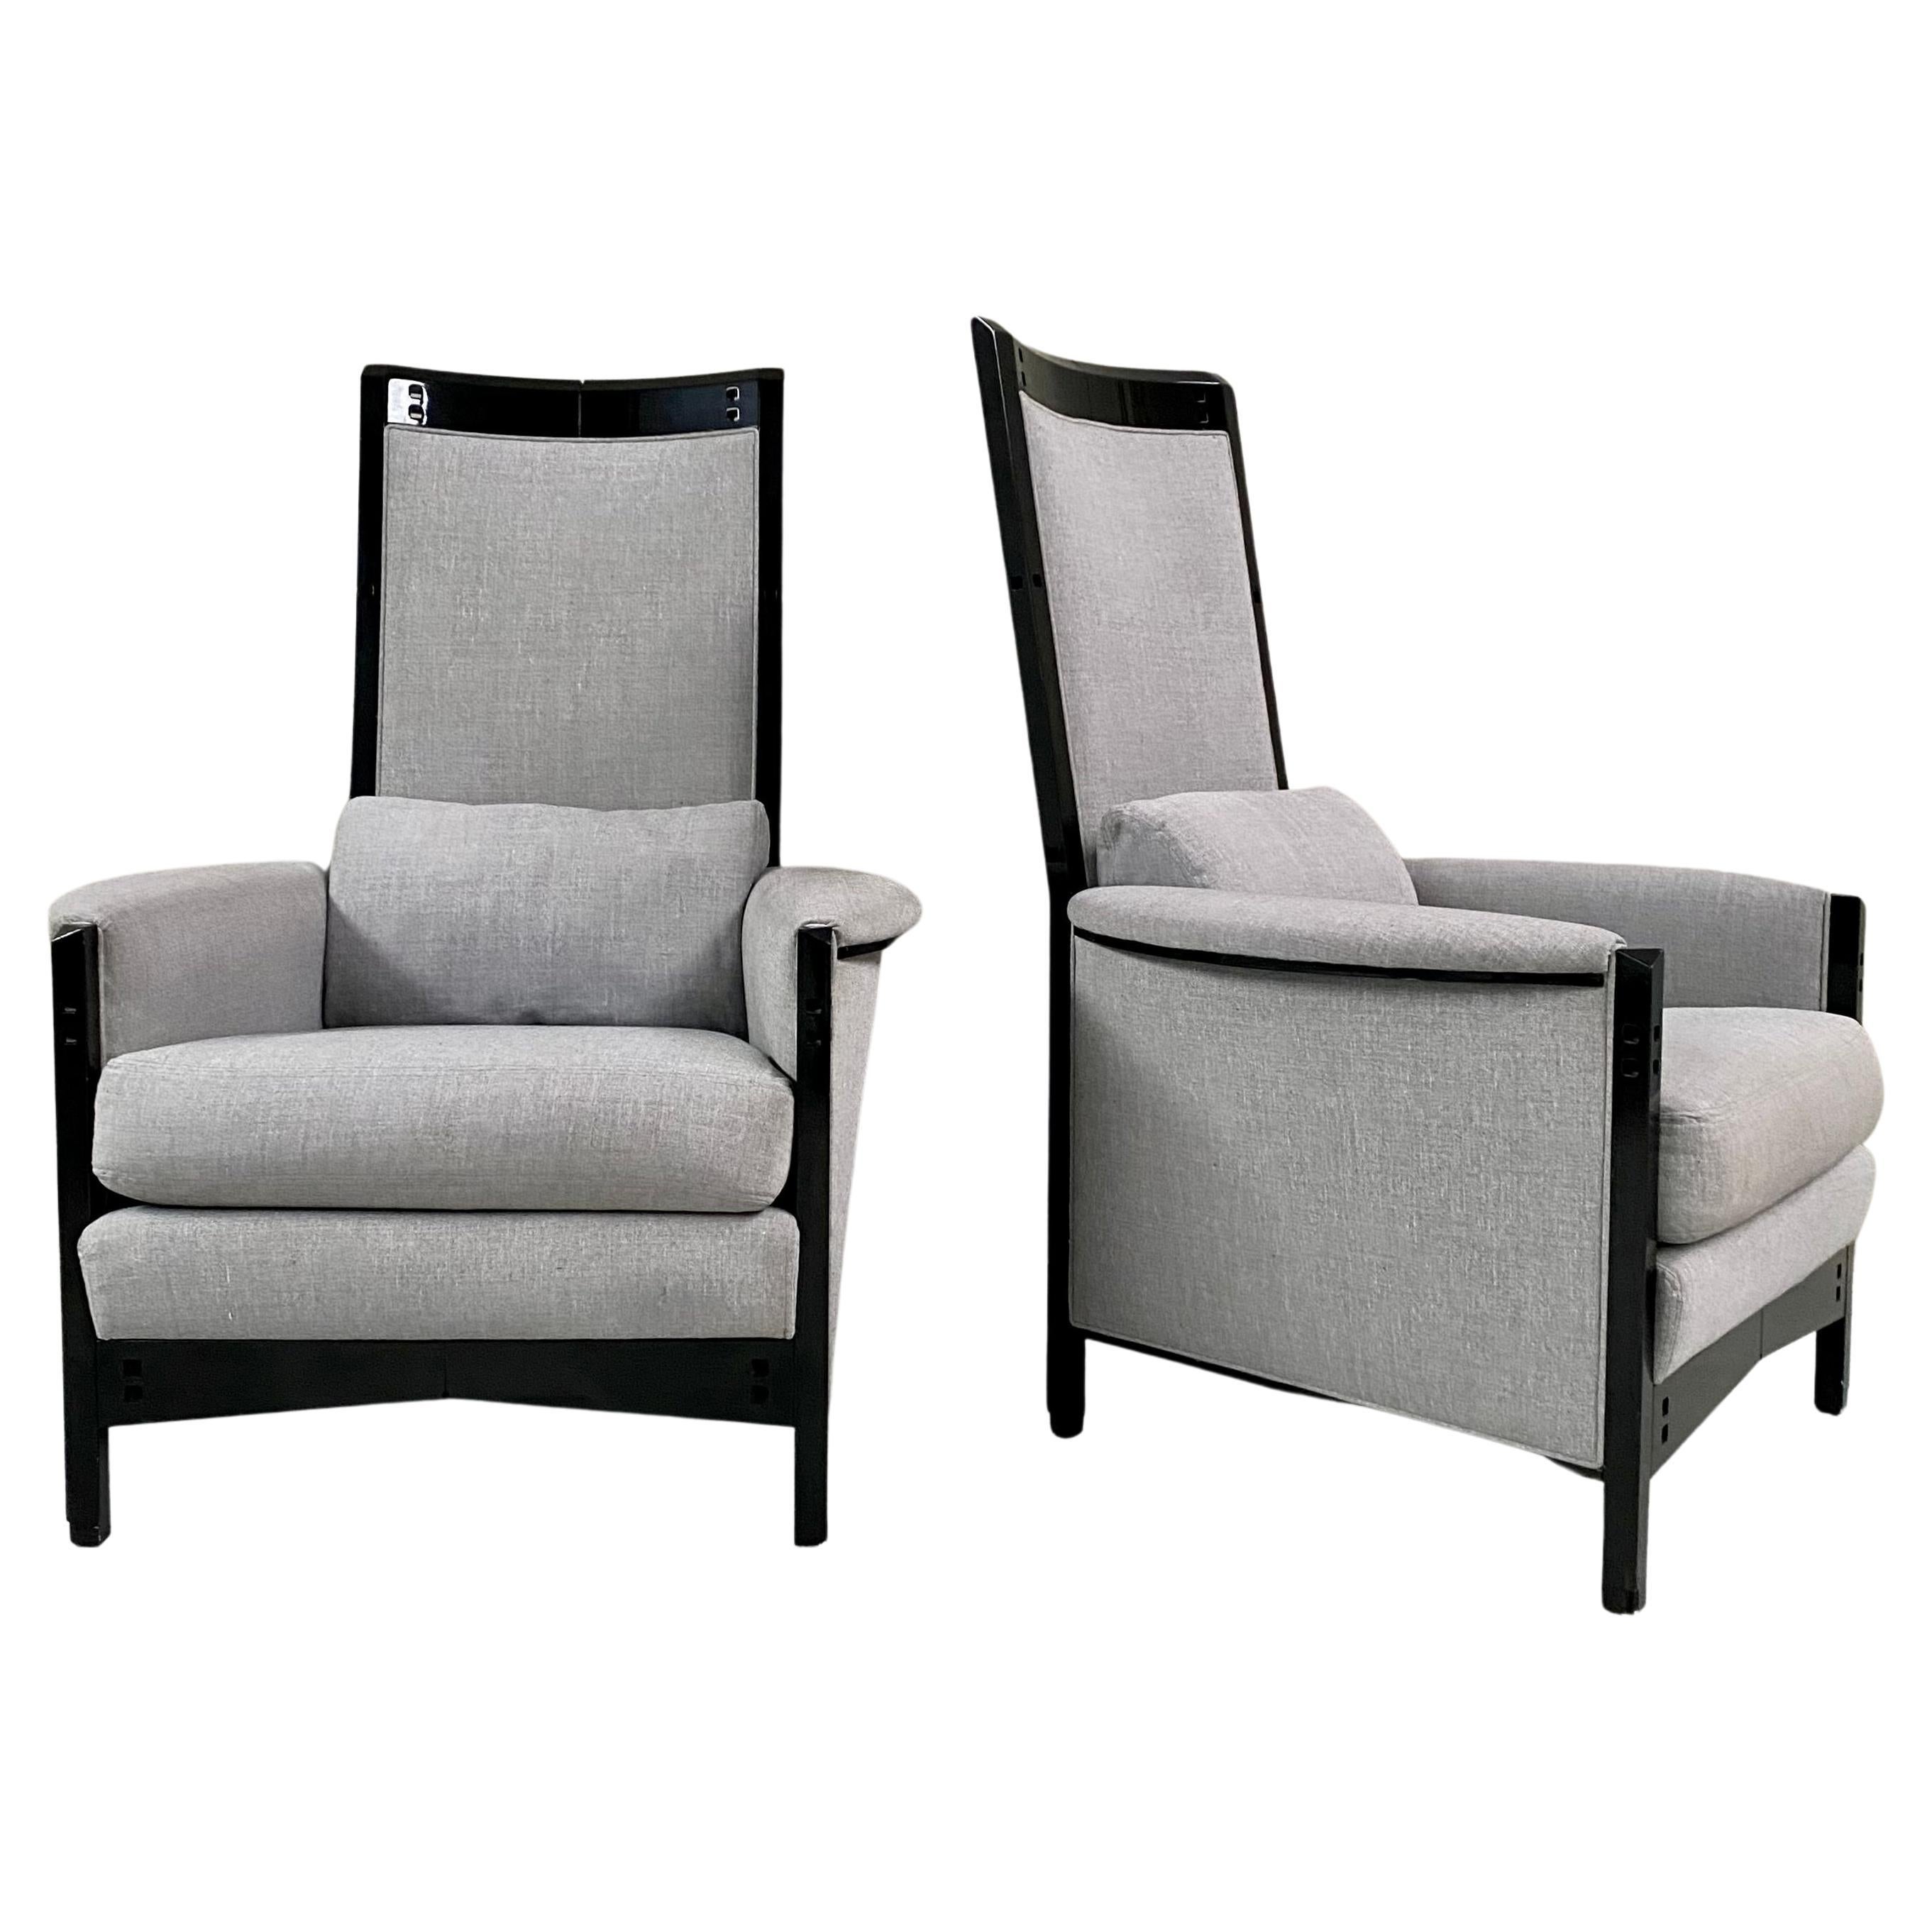 Set of 2 High Black Lacquered "Peggy" Arm Chairs by Umberto Asnago for Giorgetti For Sale